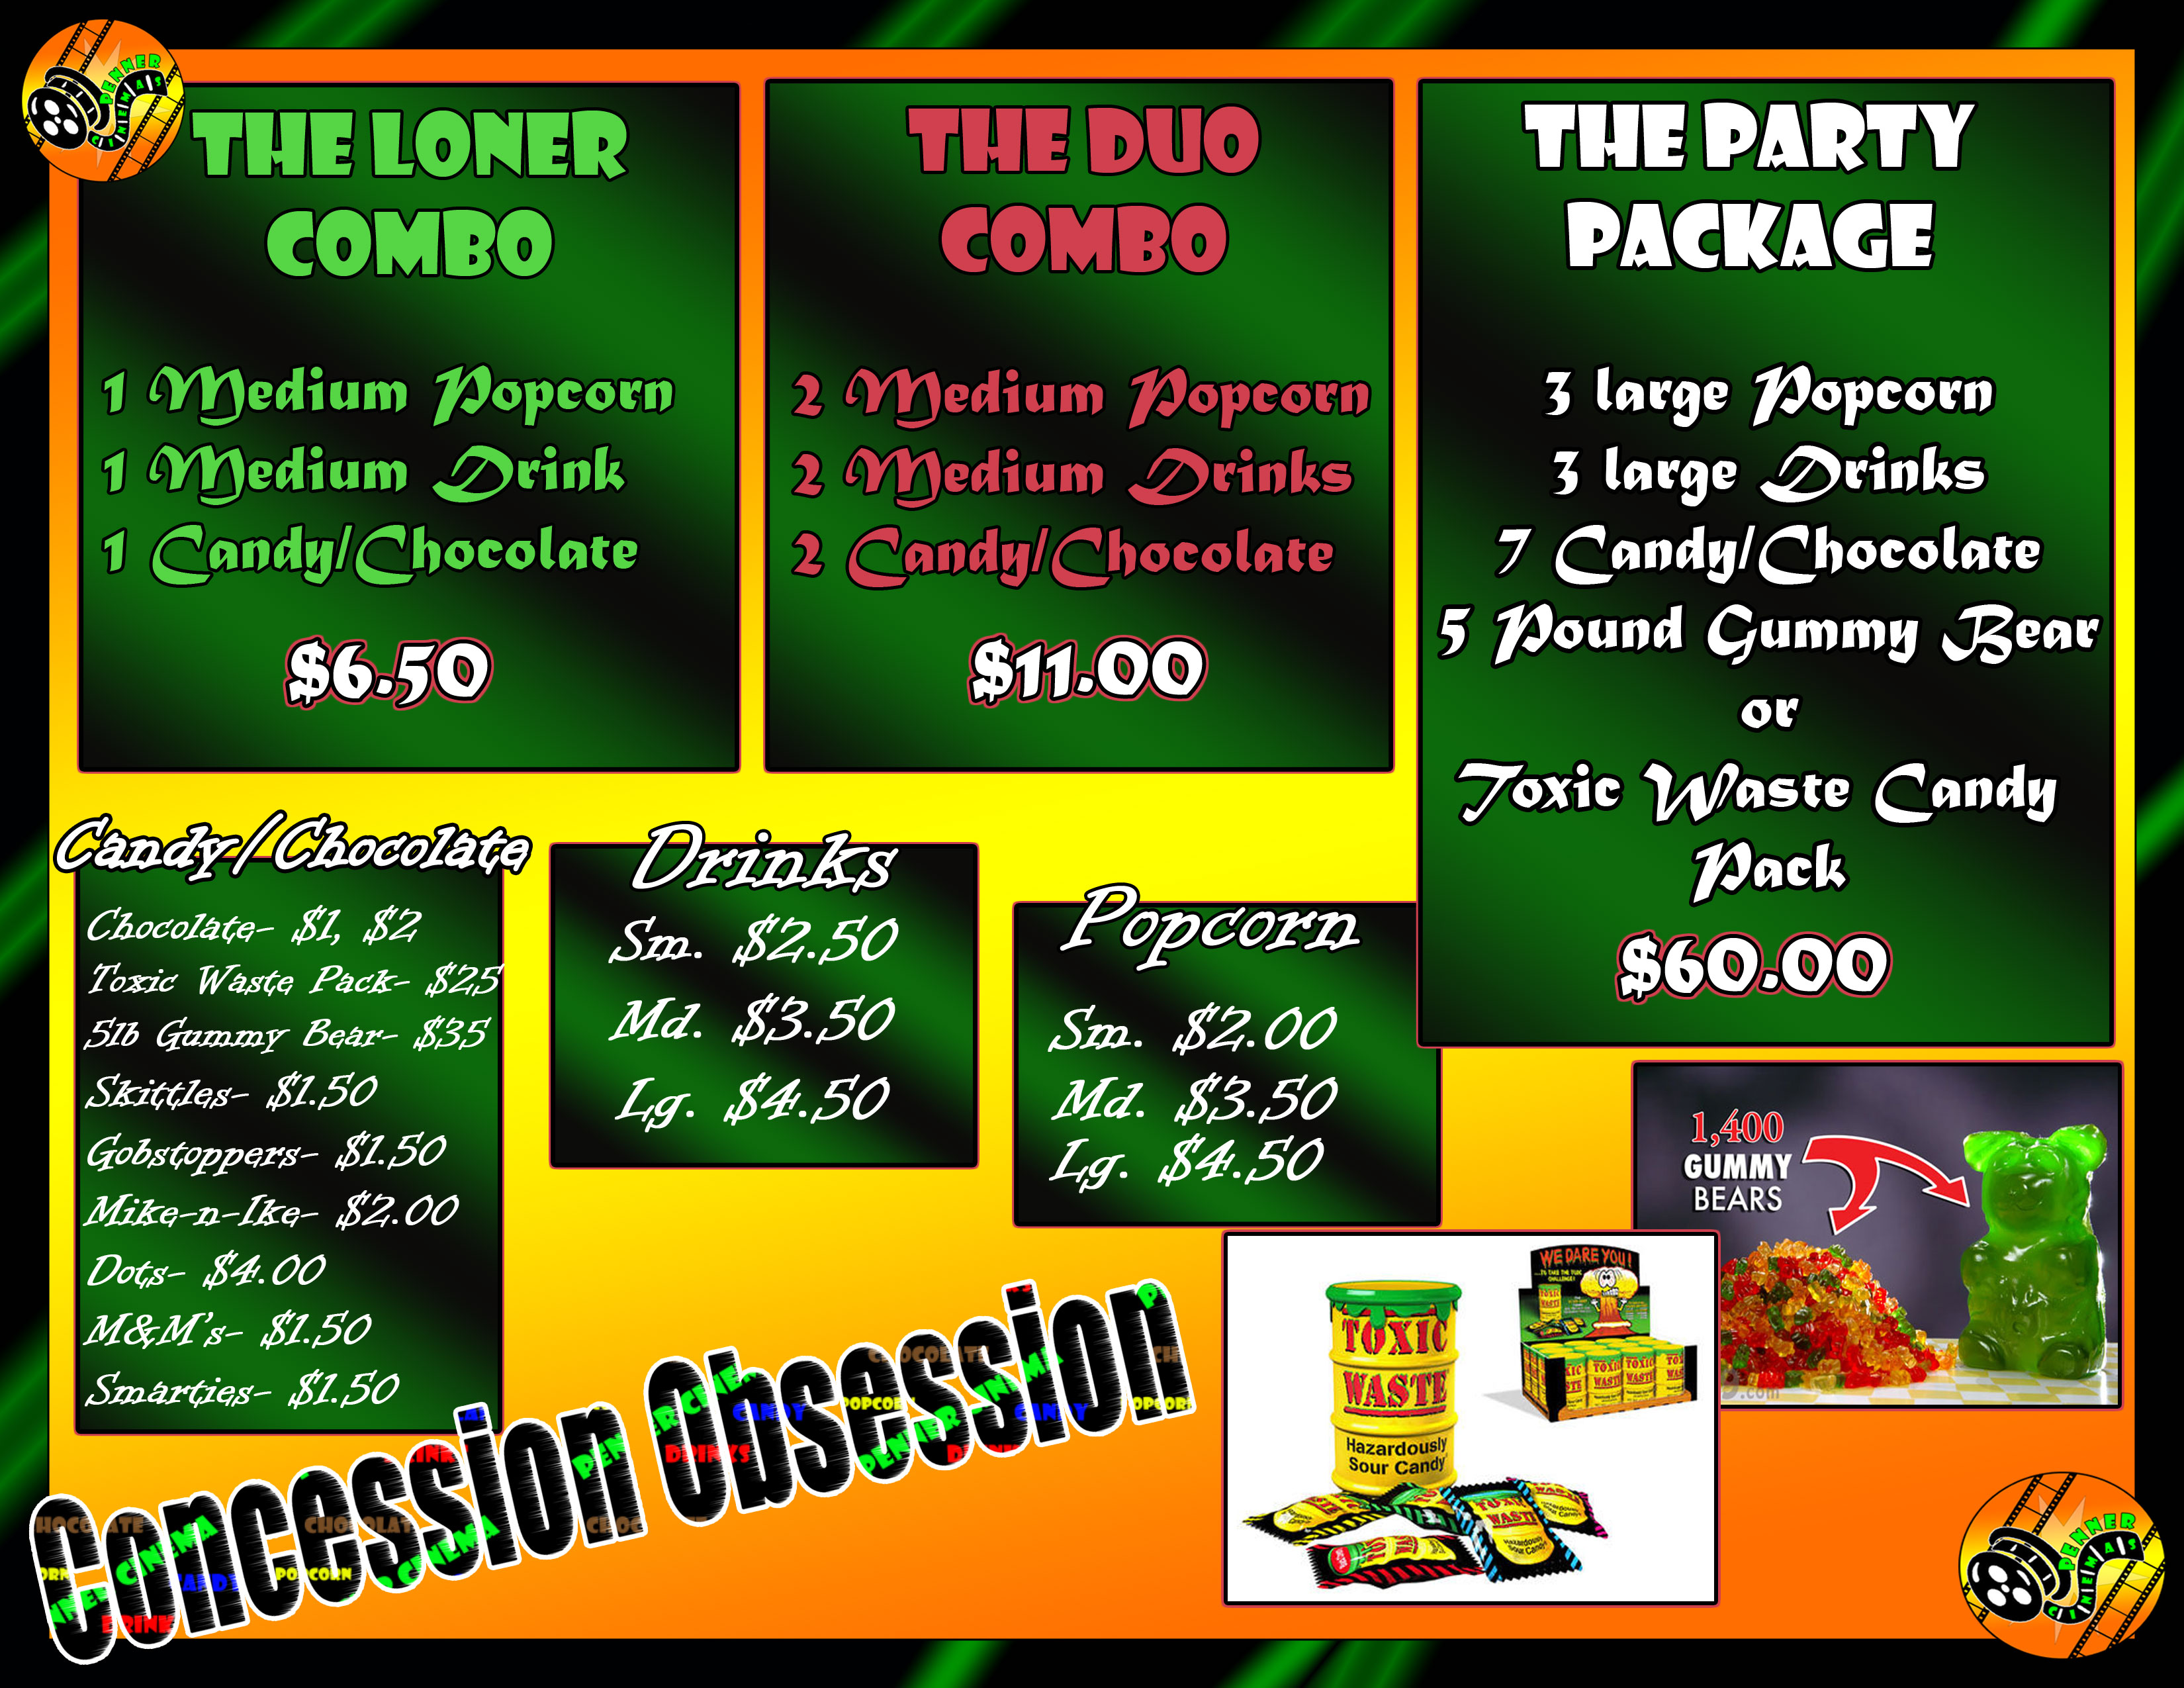 Movie Theater Concession Stand Concession Stand Flyer